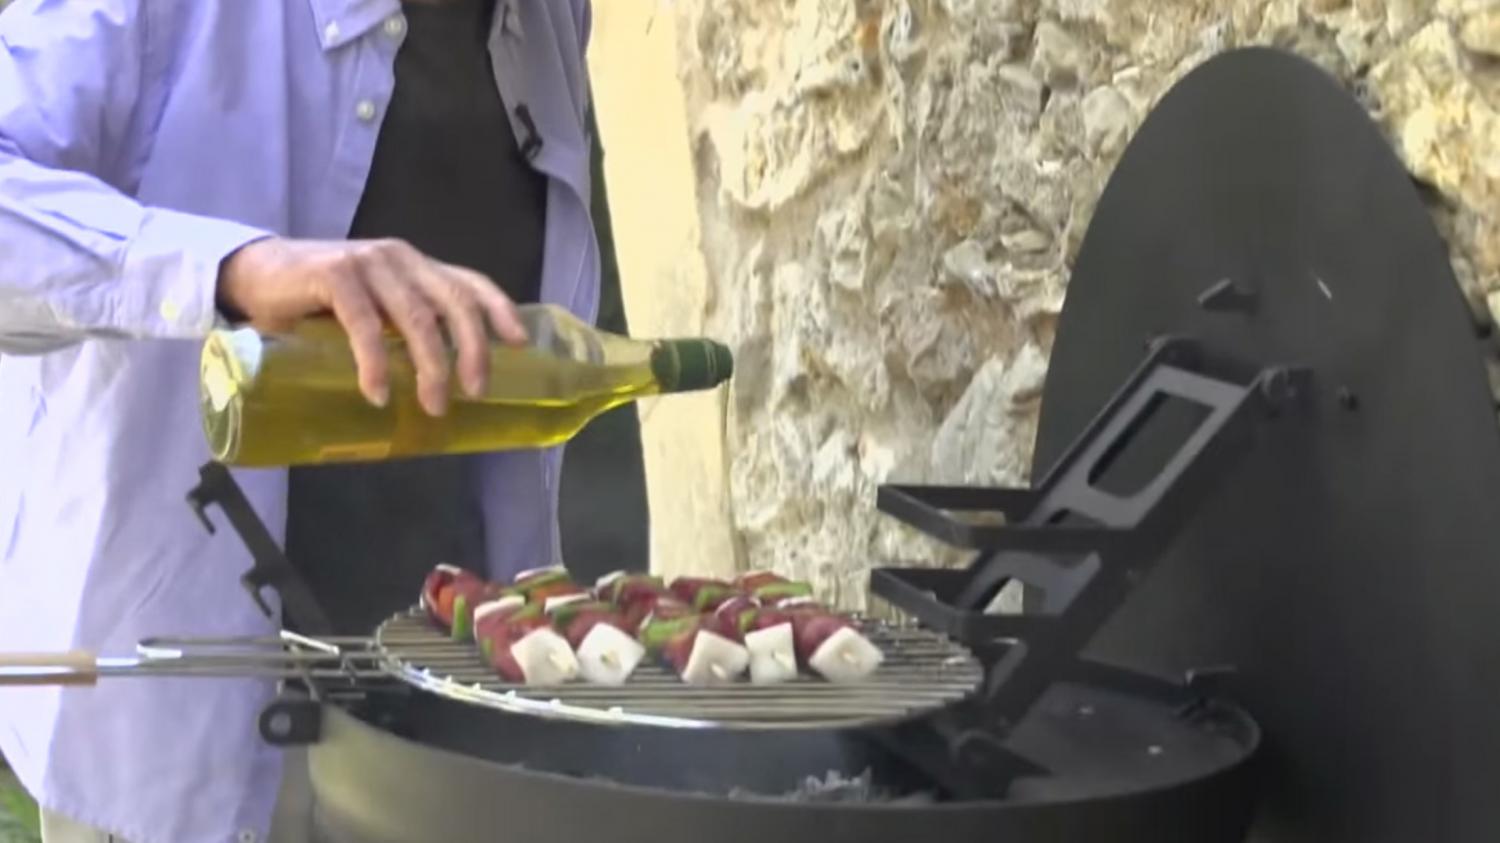 SIGMAFOCUS Retractable BBQ Grill Mounts Onto Wall Of Your House